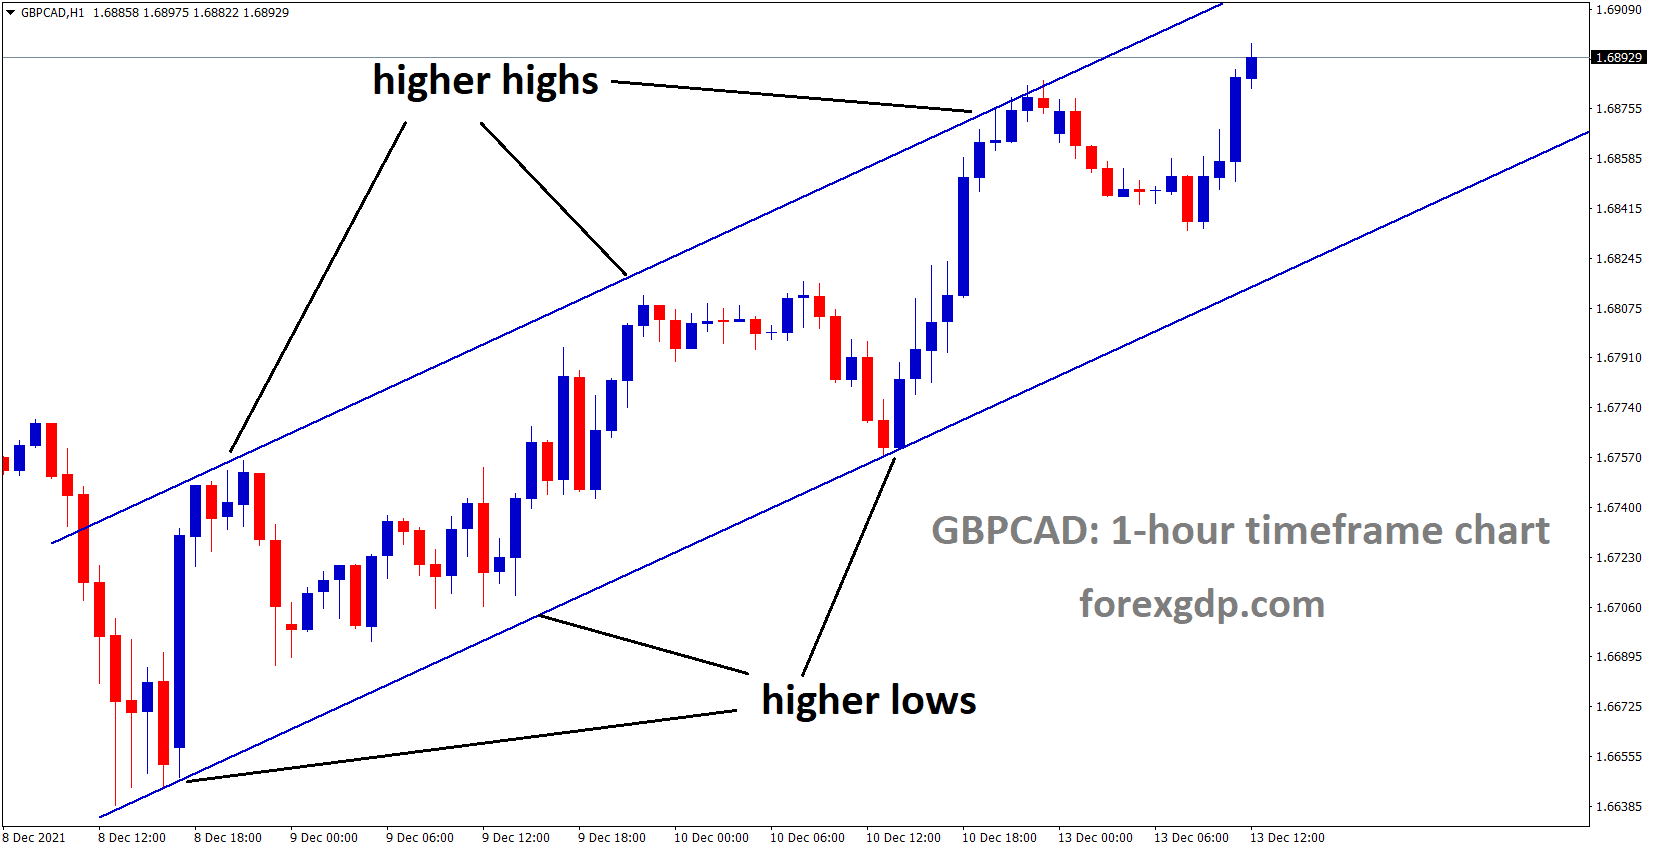 GBPCAD is moving in an Ascending channel and the market has rebounded and moving in the higher high area.